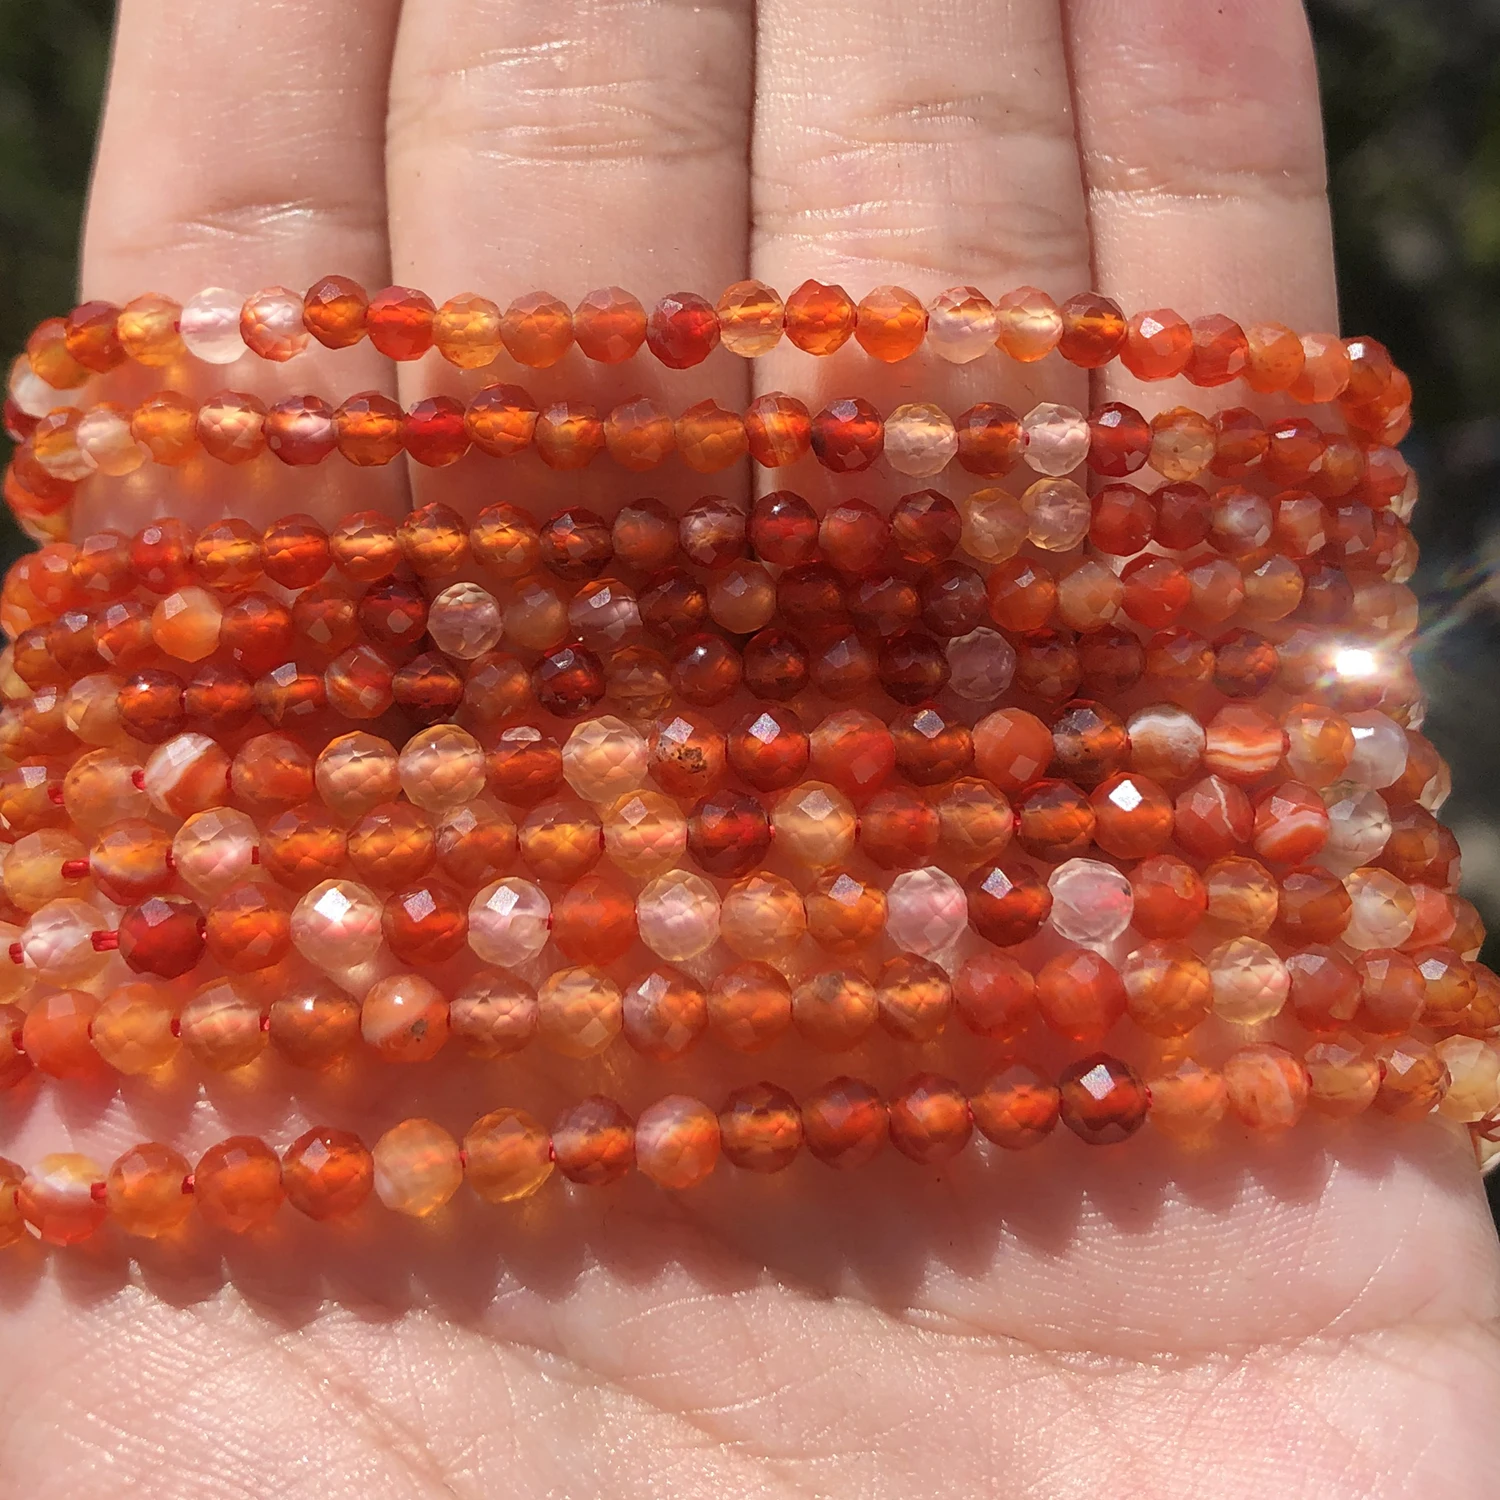 10x30mm Natural Water Drop Agates Stone Beads Loose Spacer Orange Red Beads  For Jewelry Making Earring Necklace Diy Accessories - AliExpress